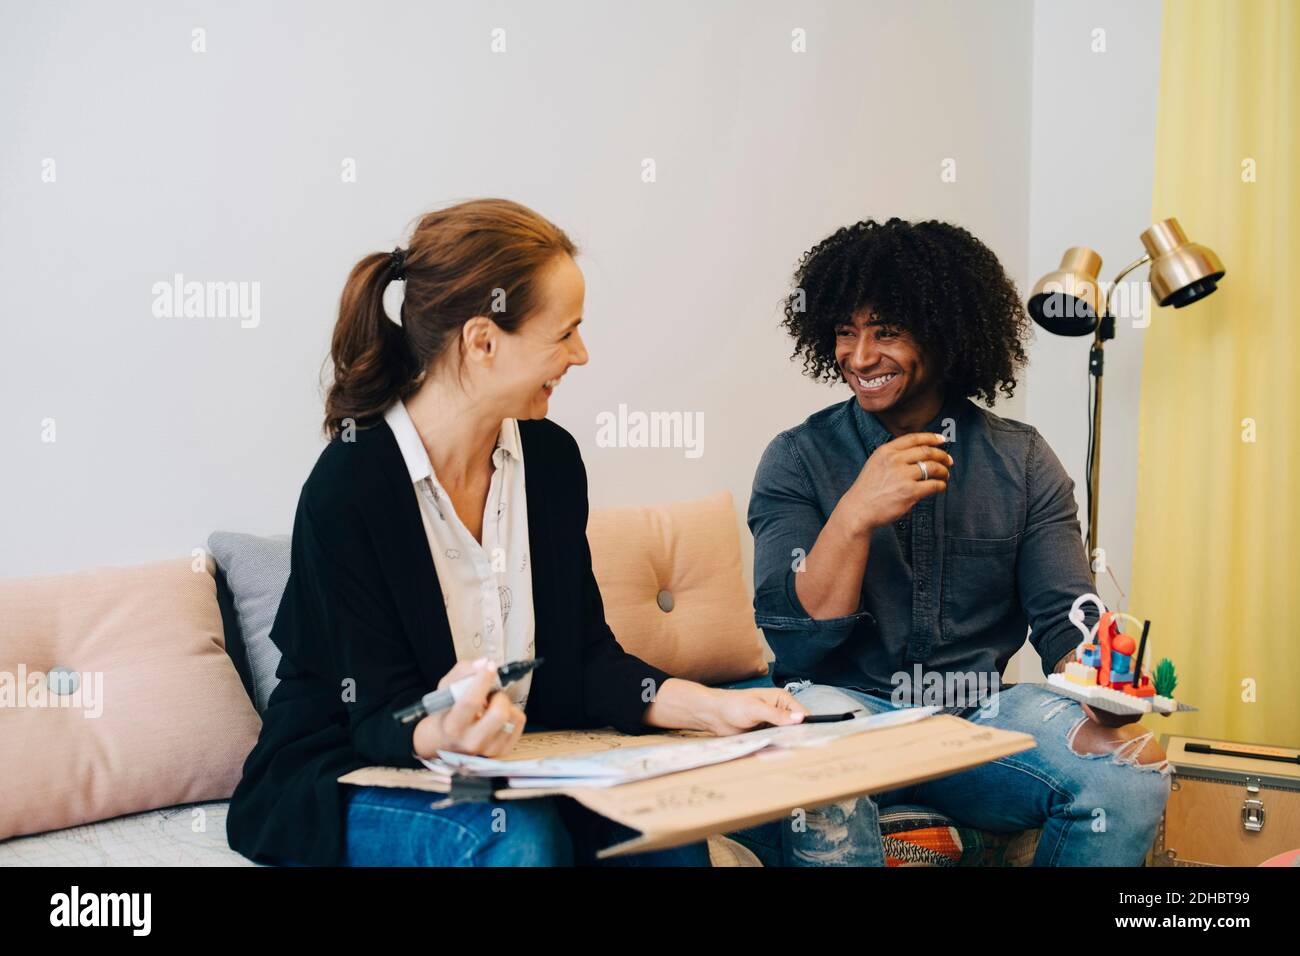 Smiling multi-ethnic business colleagues discussing over placard while sitting on sofa in lobby at creative office Stock Photo